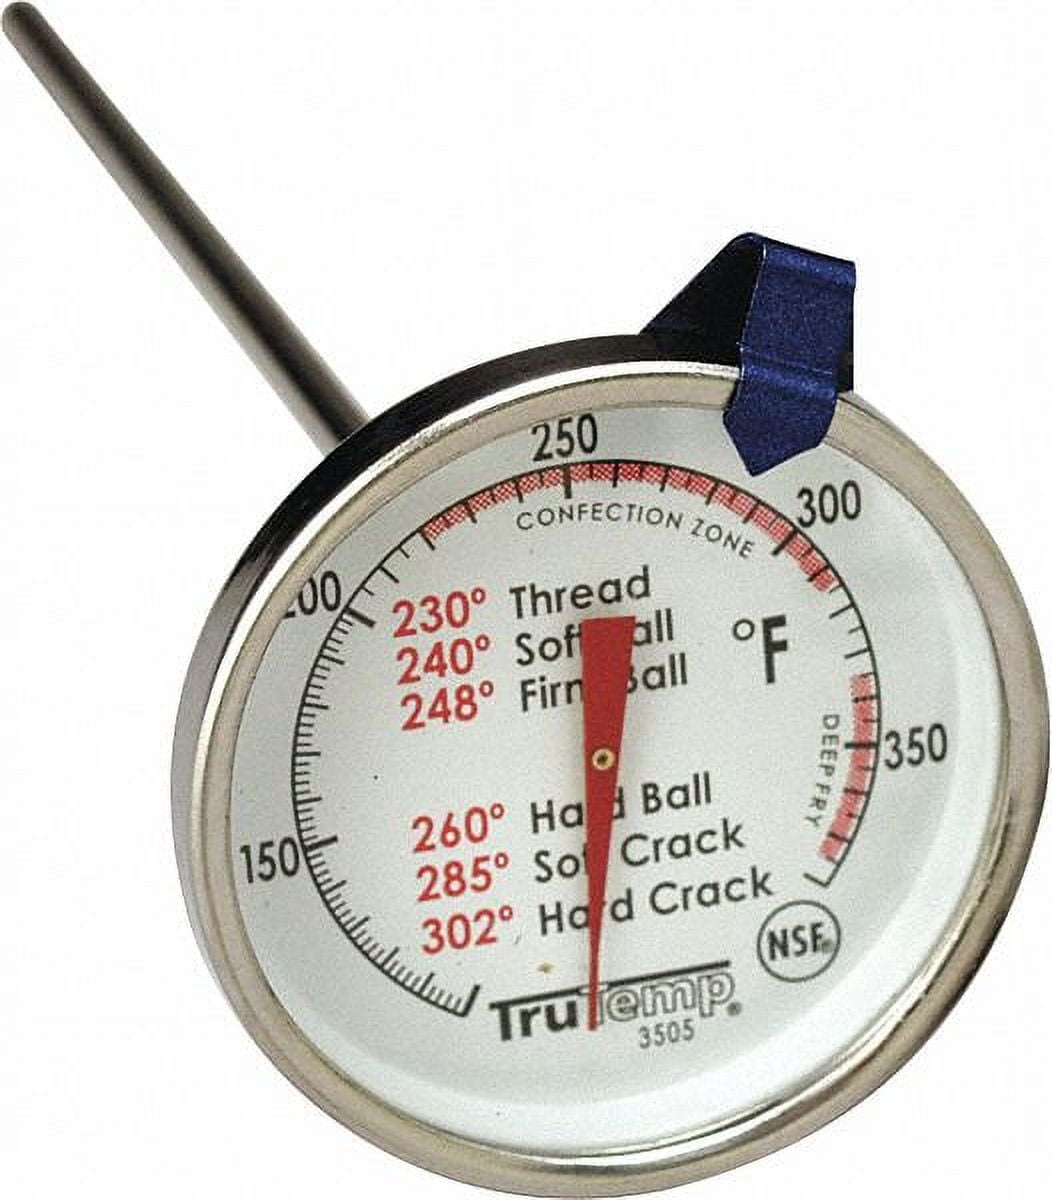 Taylor TruTemp Candy/Deep Fryer Kitchen Thermometer - Gillman Home Center